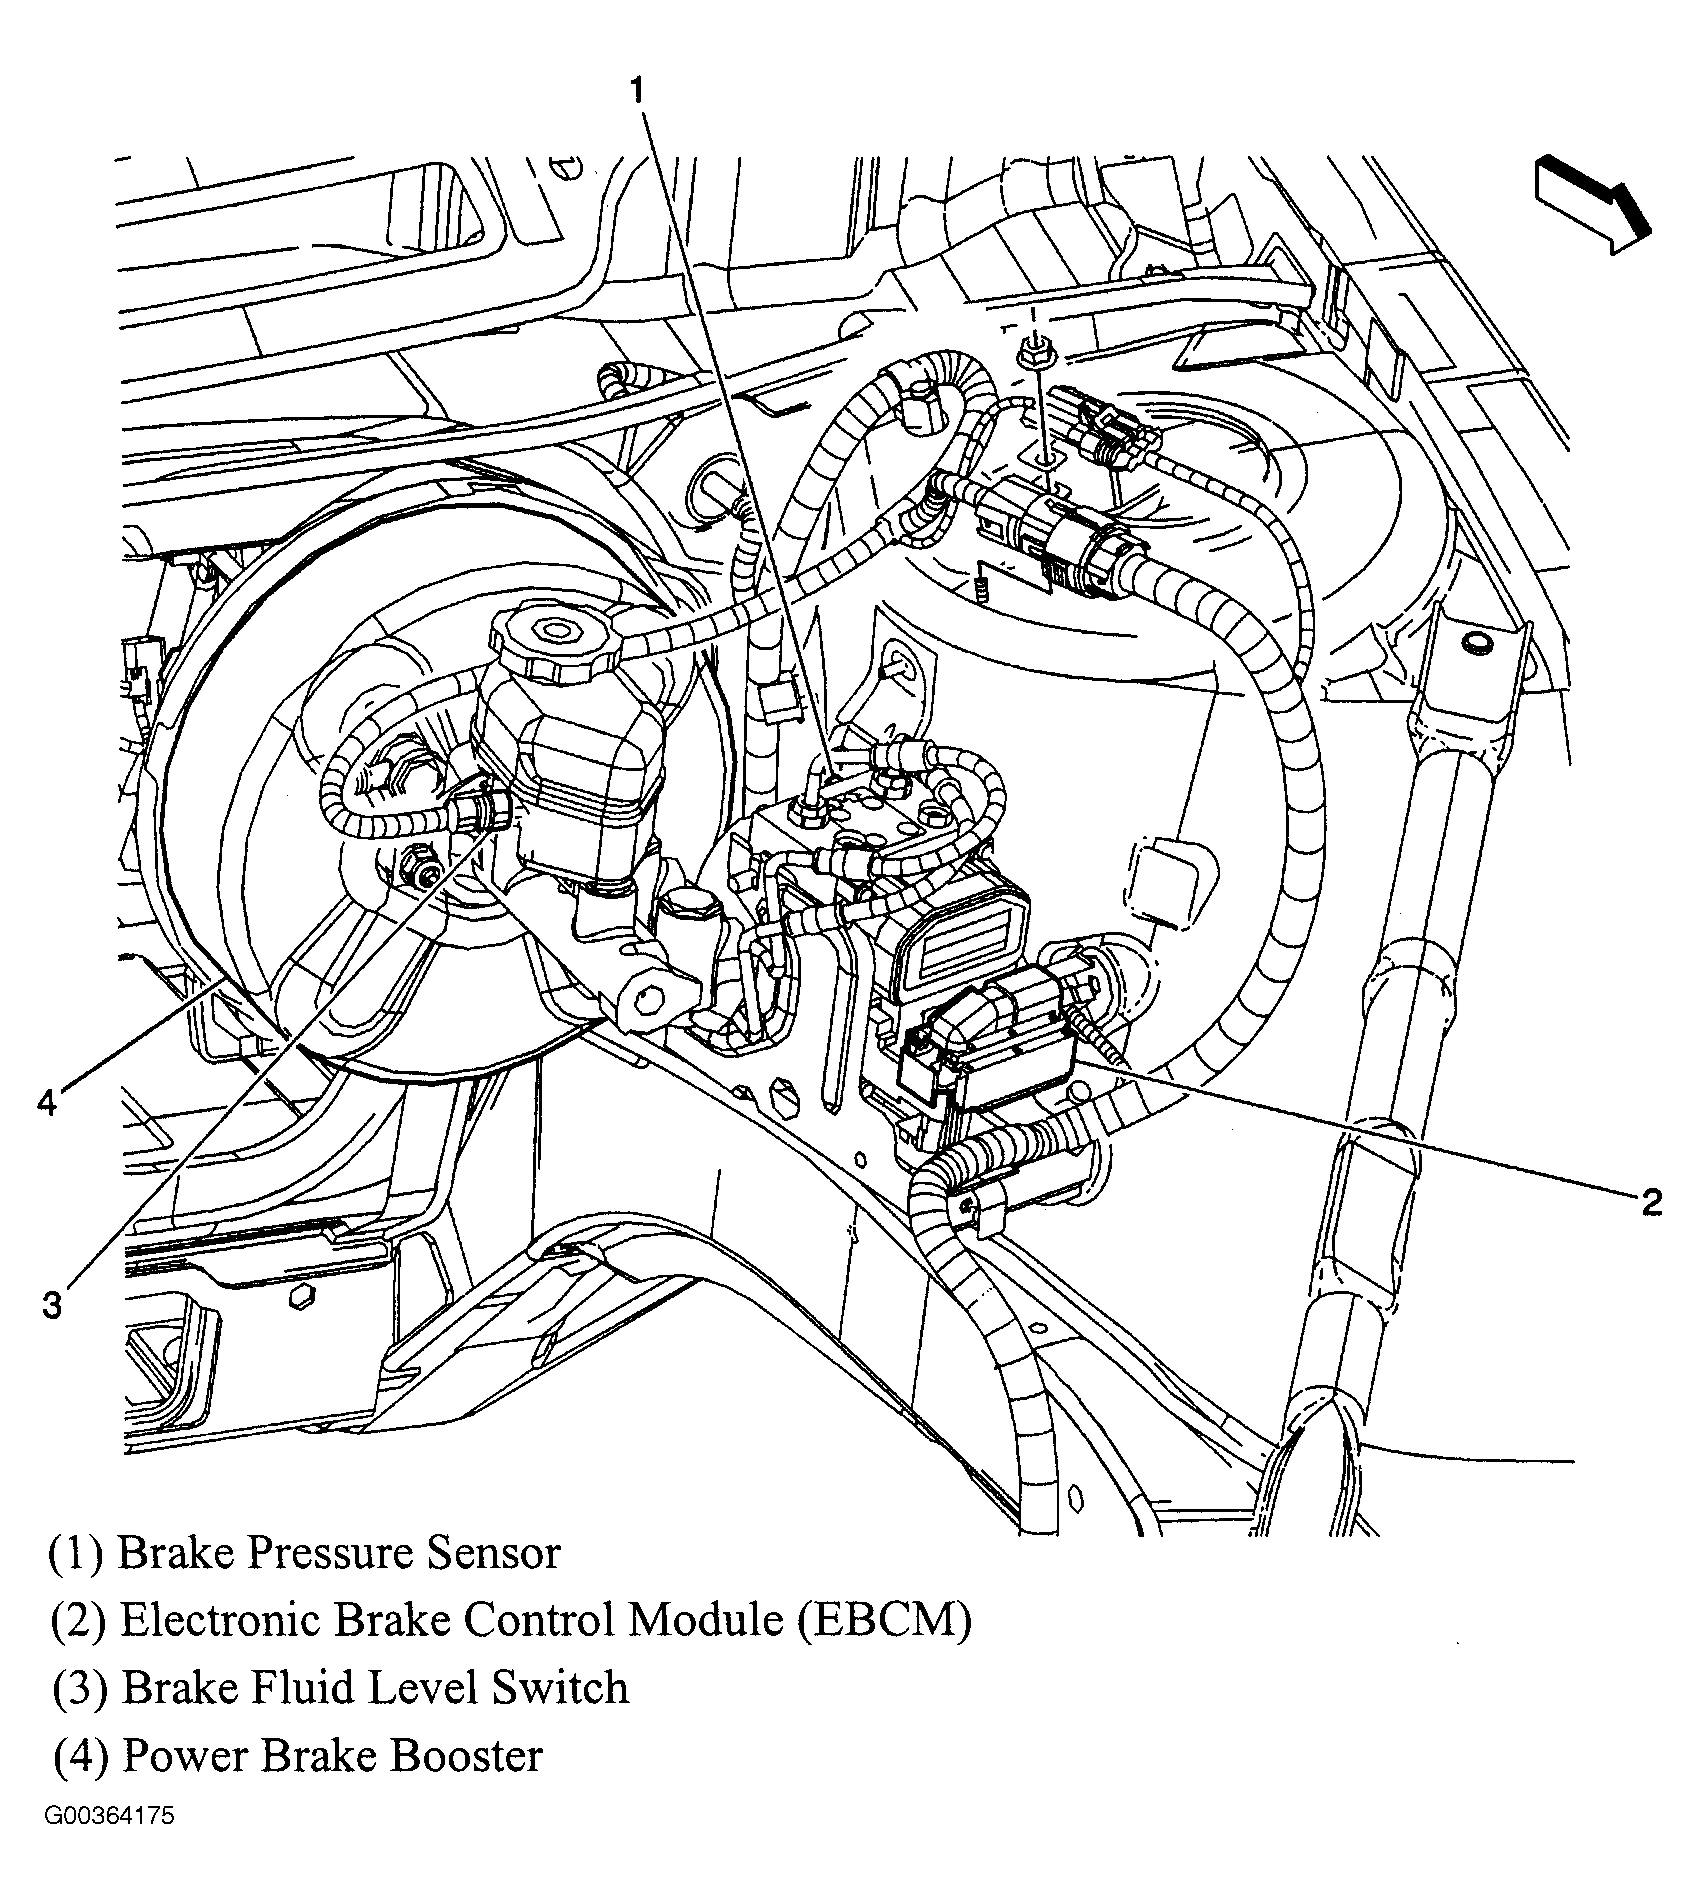 Buick LaCrosse CX 2008 - Component Locations -  Left Rear Of Engine Compartment